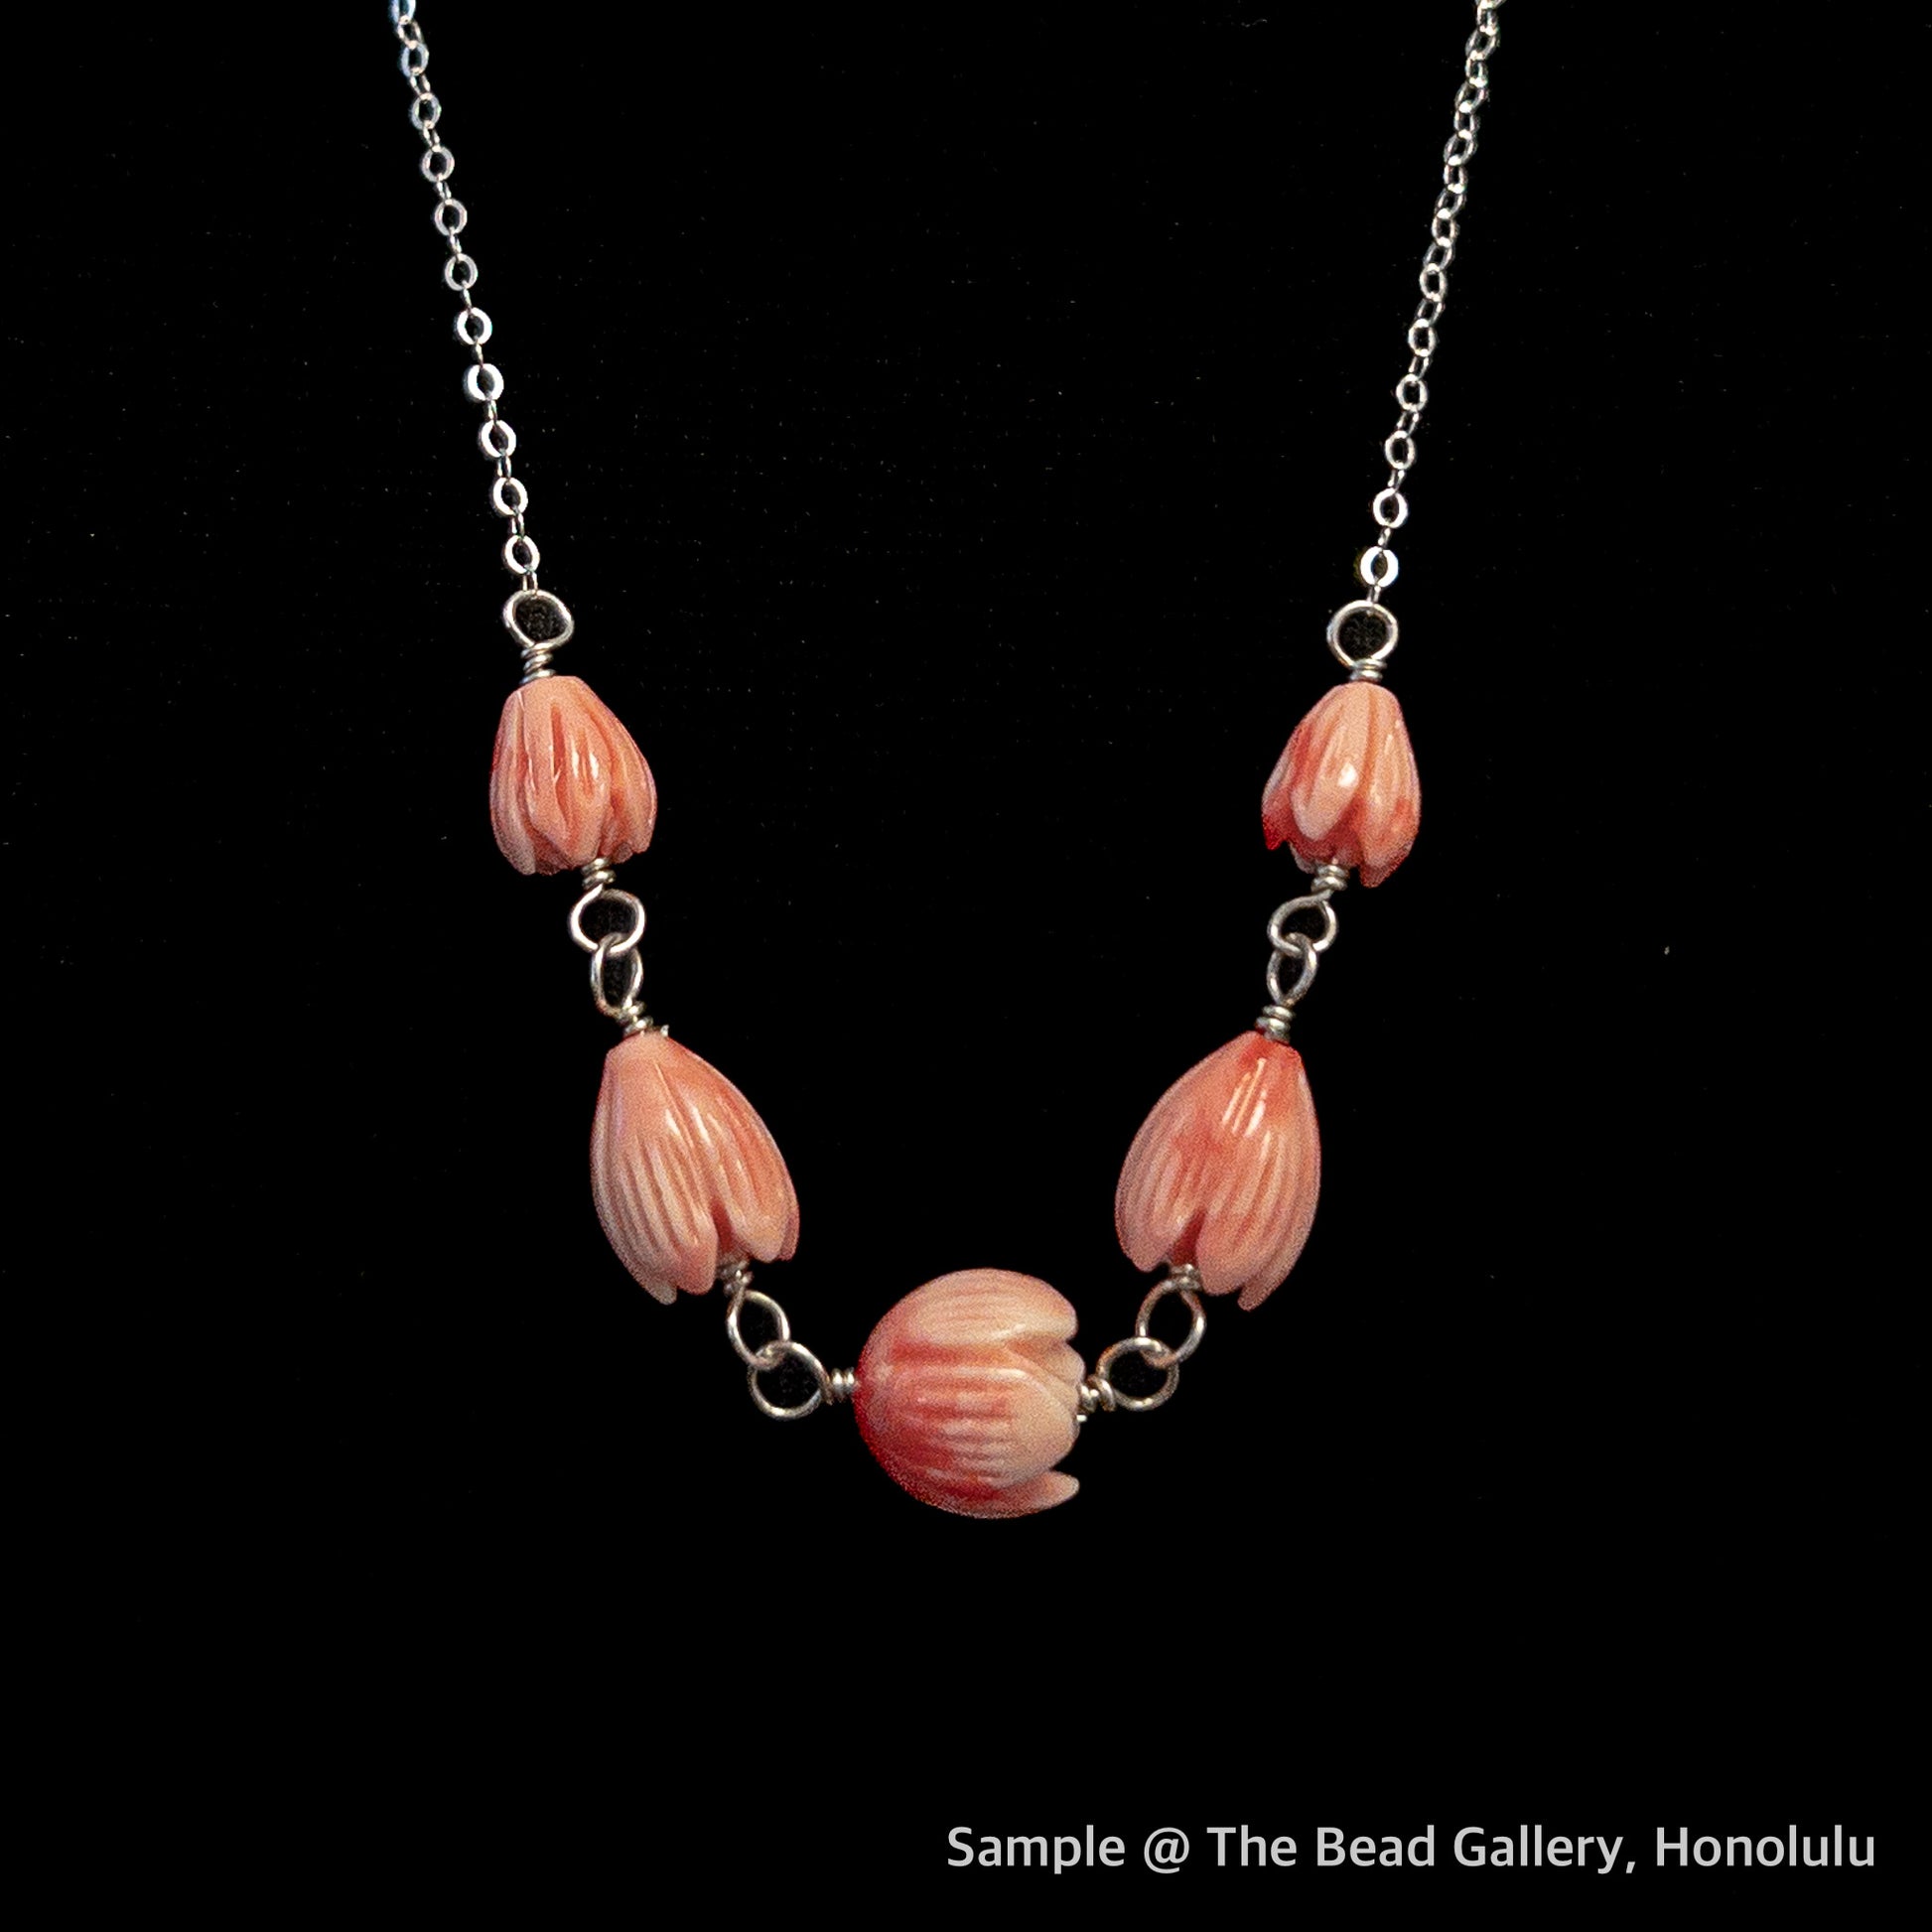 Pikake Bead Reconstituted Shell (Pink Coral Color) - 3 pcs.-The Bead Gallery Honolulu